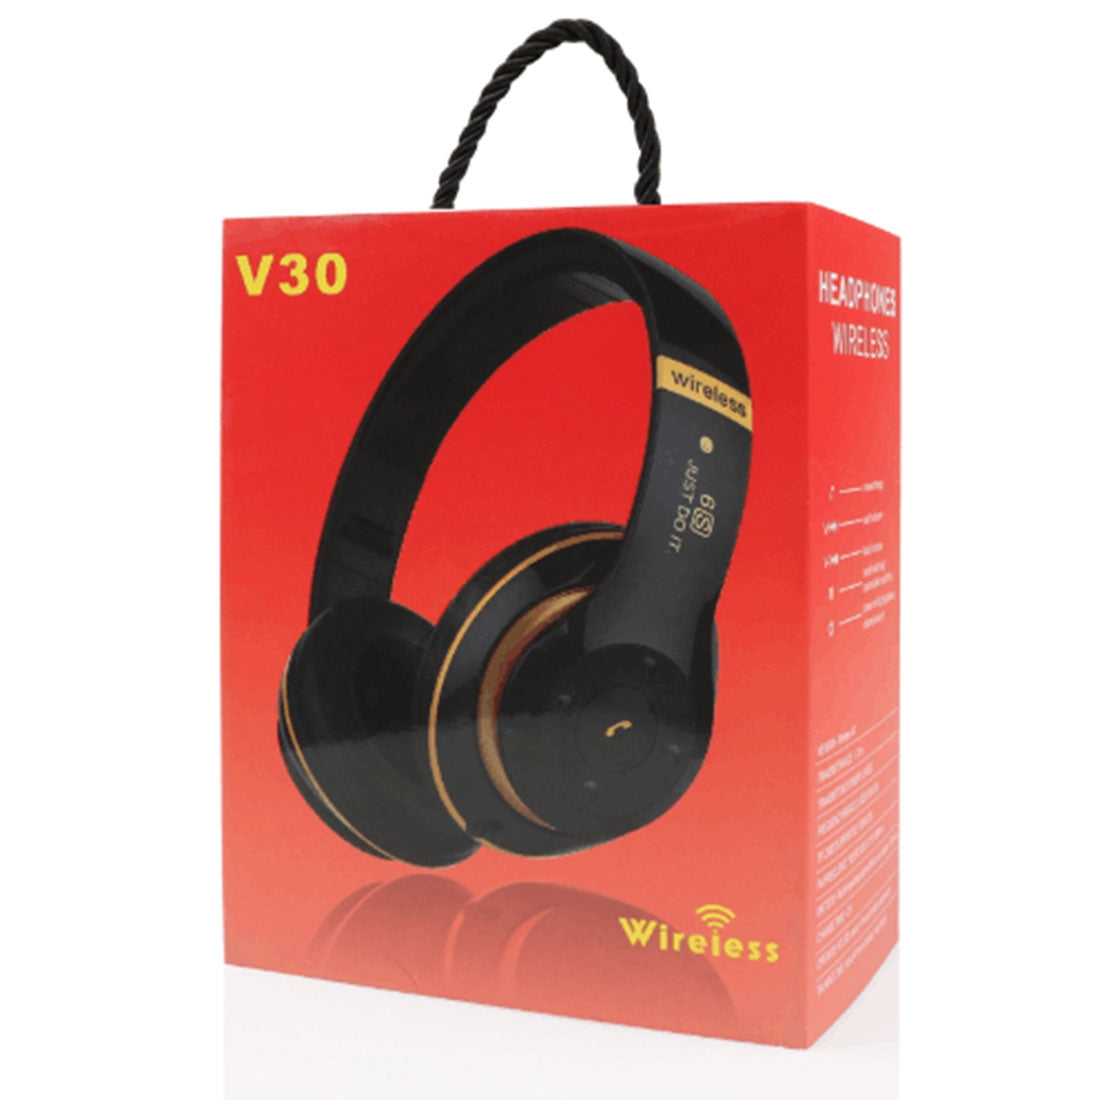 V30 Wireless Bluetooth 4.2 Headphone with Mic & FM & TF Card & Handfree Function, For iPhone, iPad, iPod, Samsung, HTC, Sony, Huawei, Xiaomi and other Audio Devices(Black)